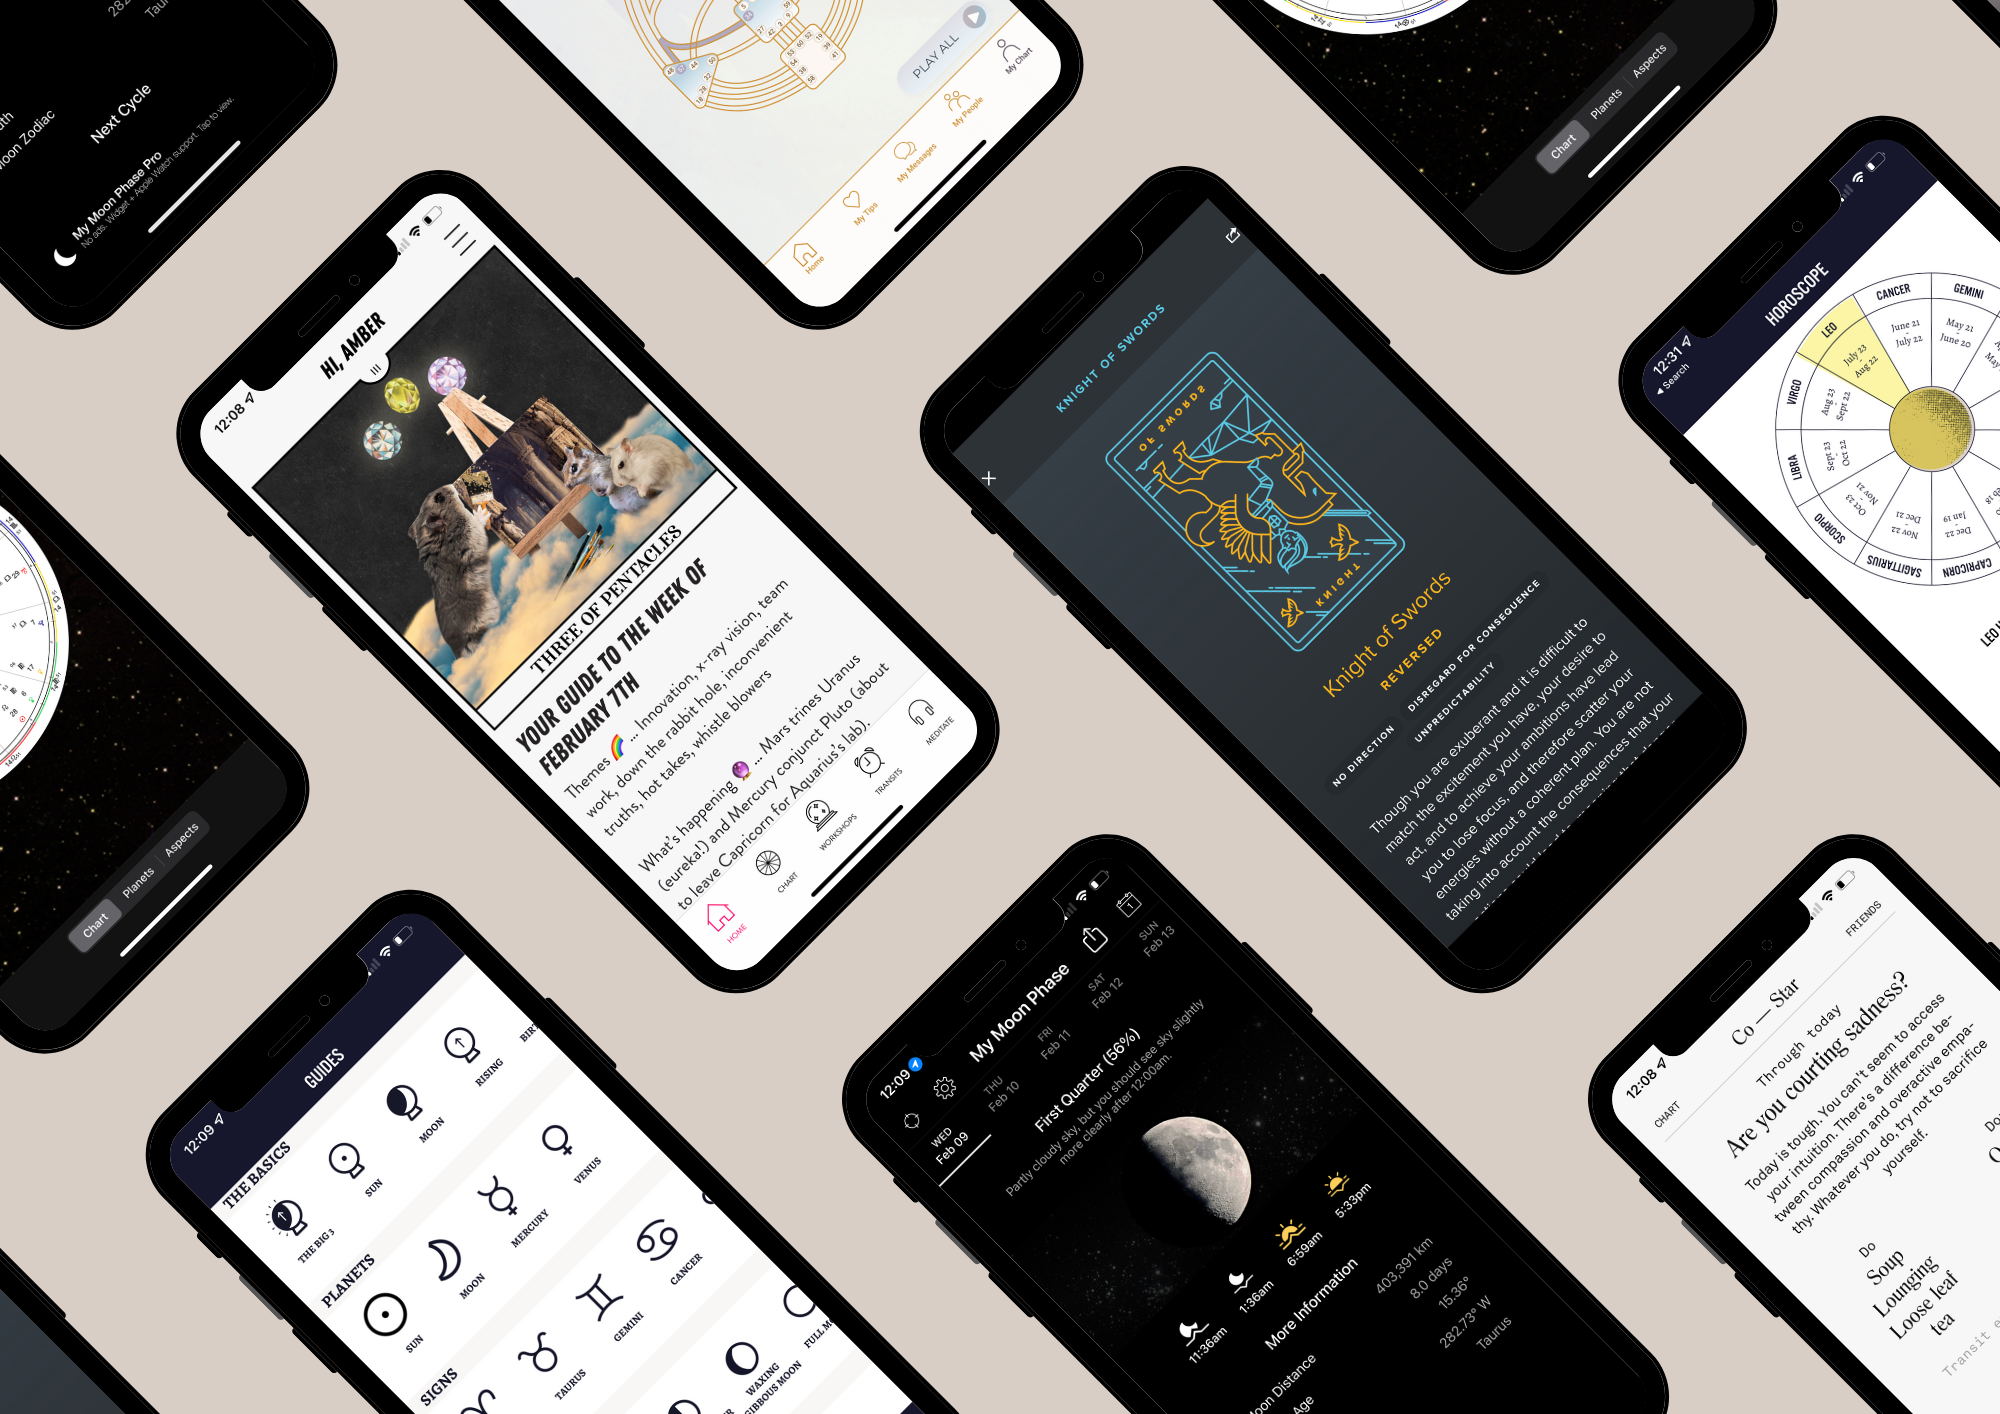 8 Astrology Apps We are Obsessed with website design by Studio Seagraves Shopify and Shopify Plus eCommerce Web Agency based in St. Louis, Missouri Chesterfield Area Klaviyo Email Marketing for Shopify and SEO Services for Shopify